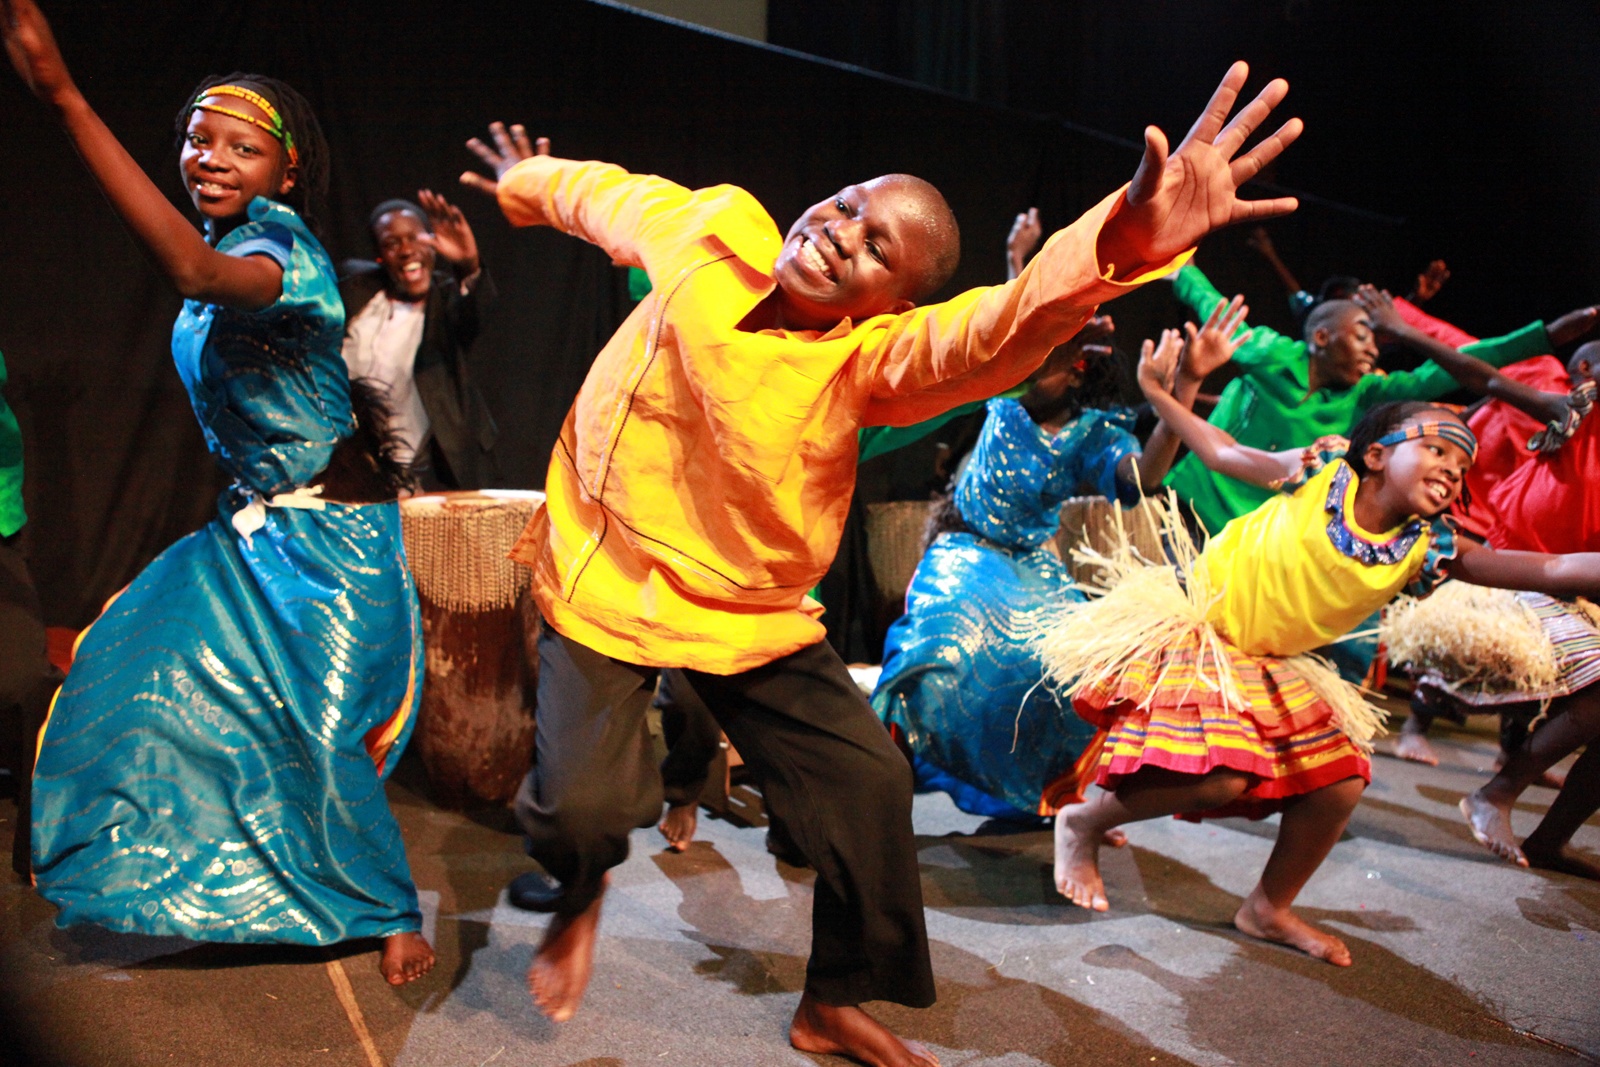 SHARING JOY – The acclaimed Watoto Children’s Choir will be performing this evening at Family of Faith Church.